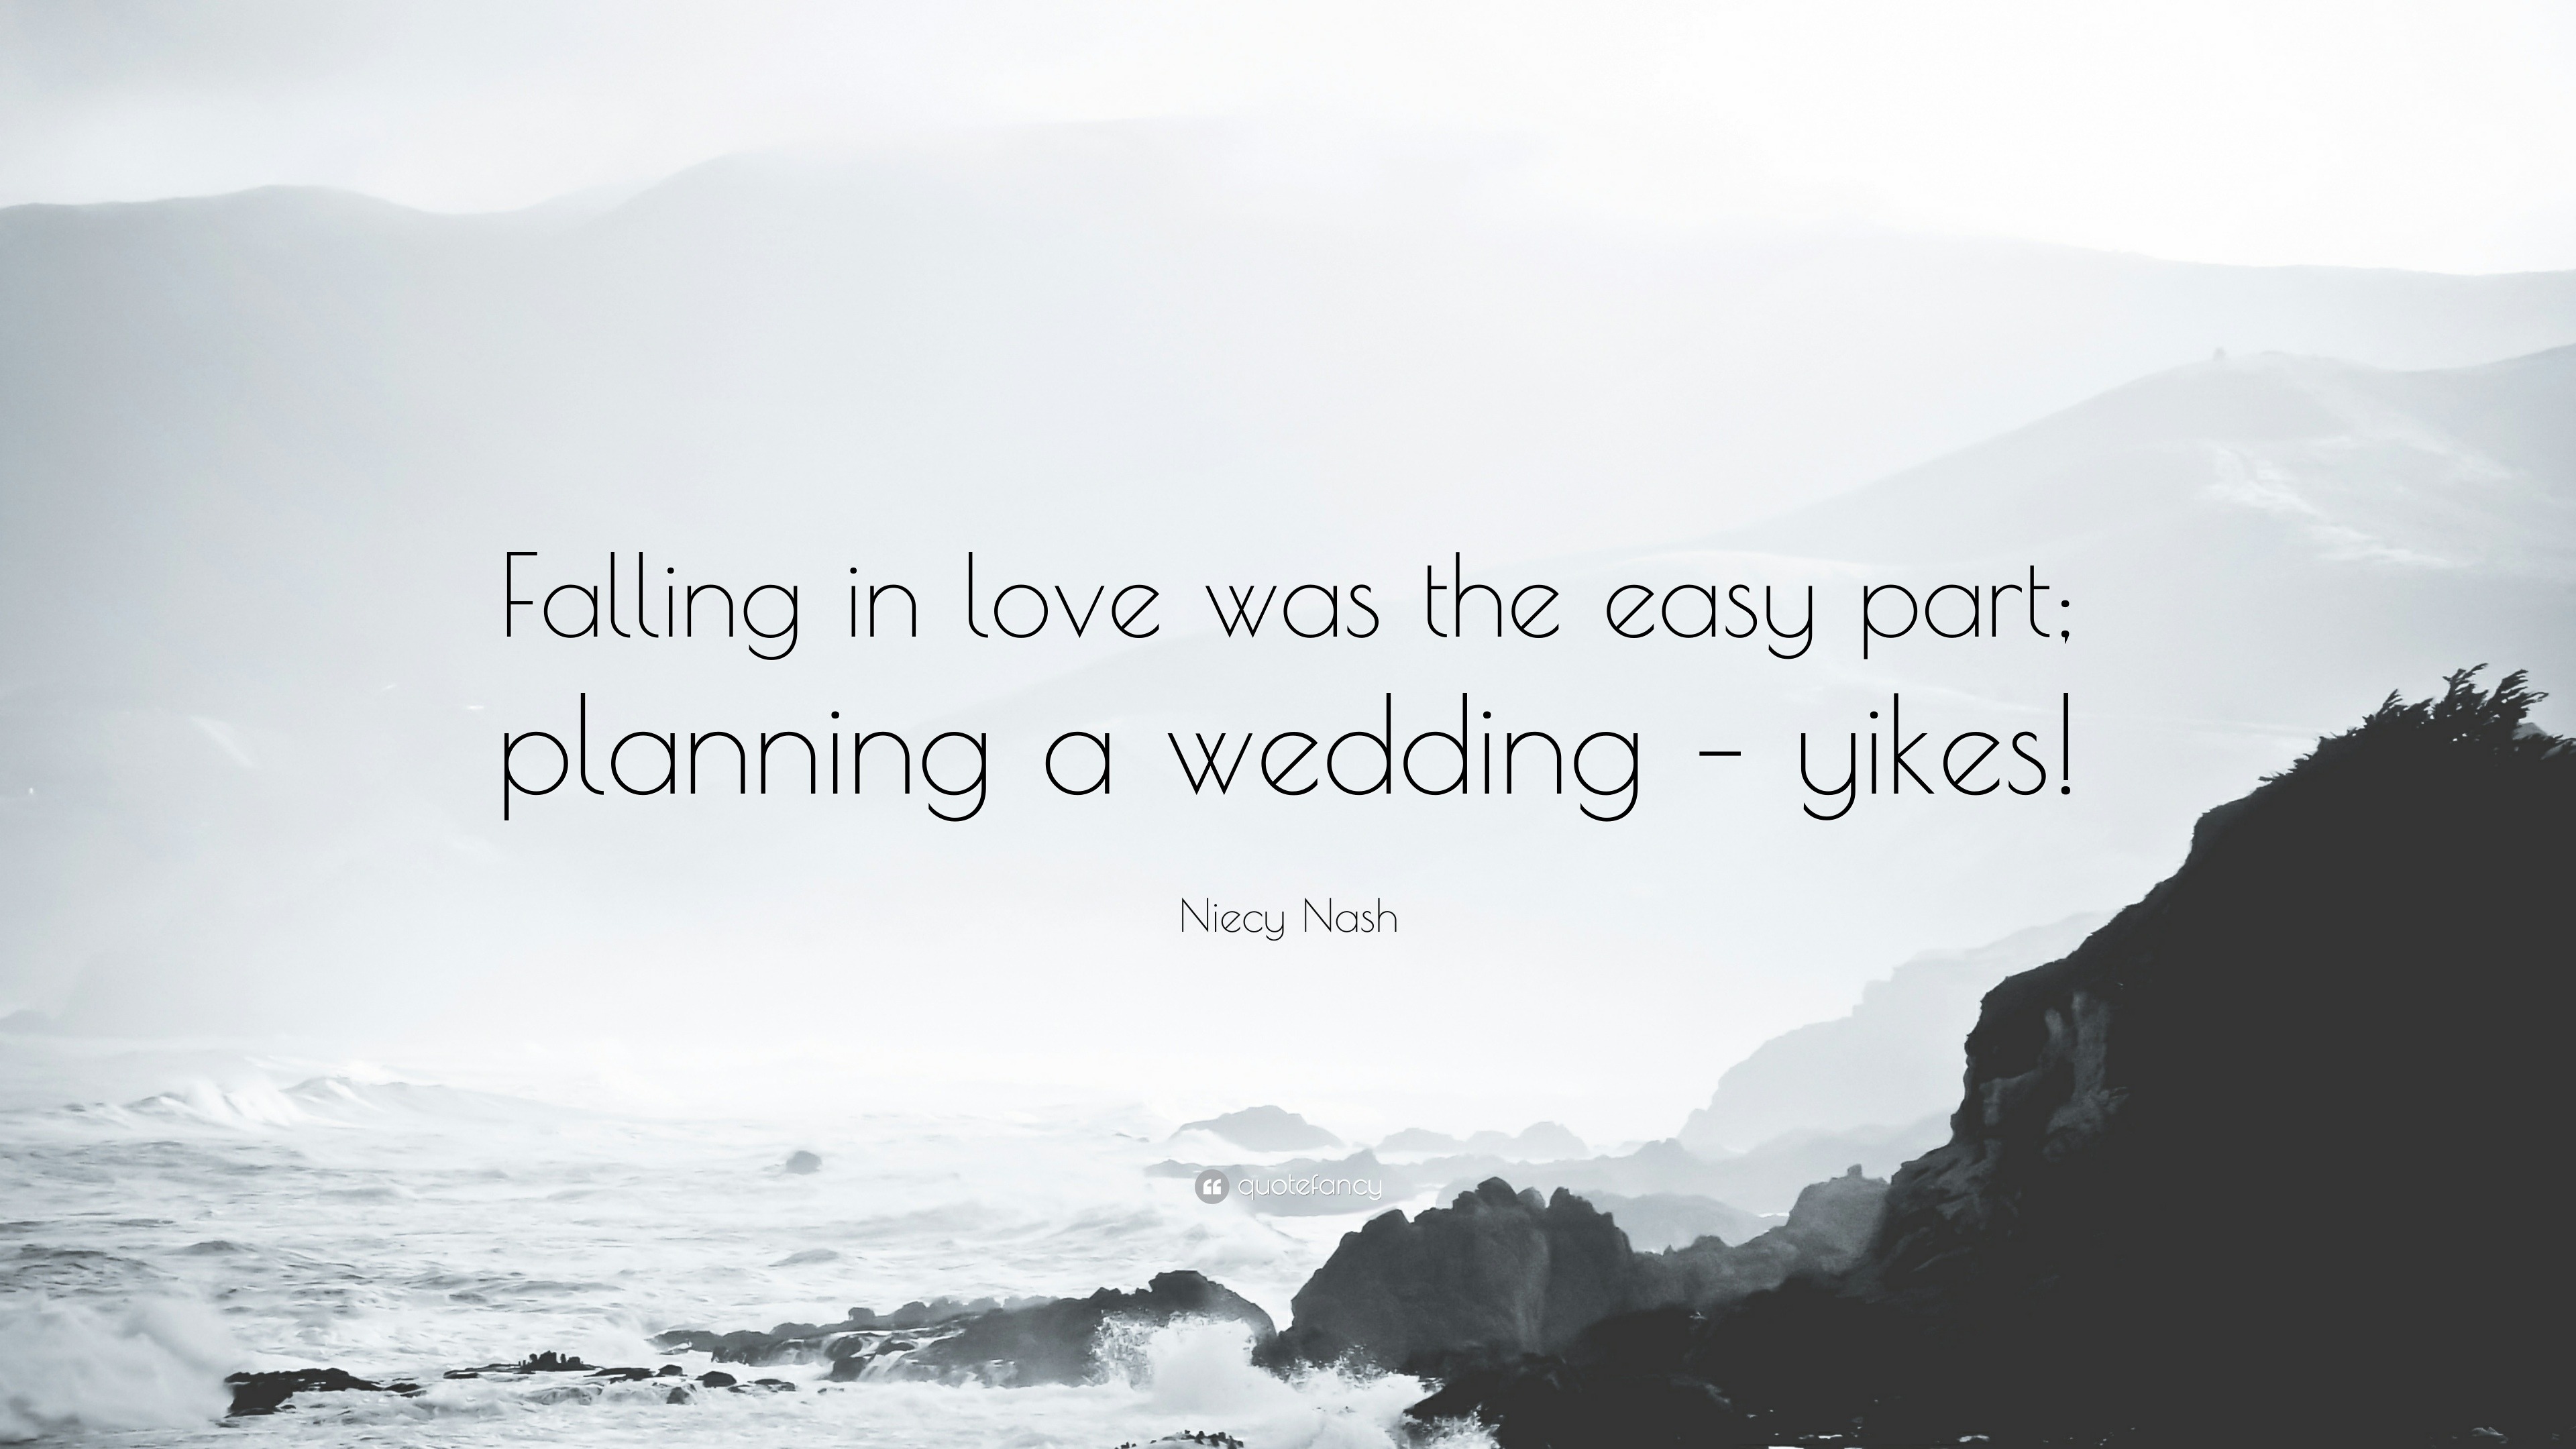 Niecy Nash Quote “Falling in love was the easy part planning a wedding